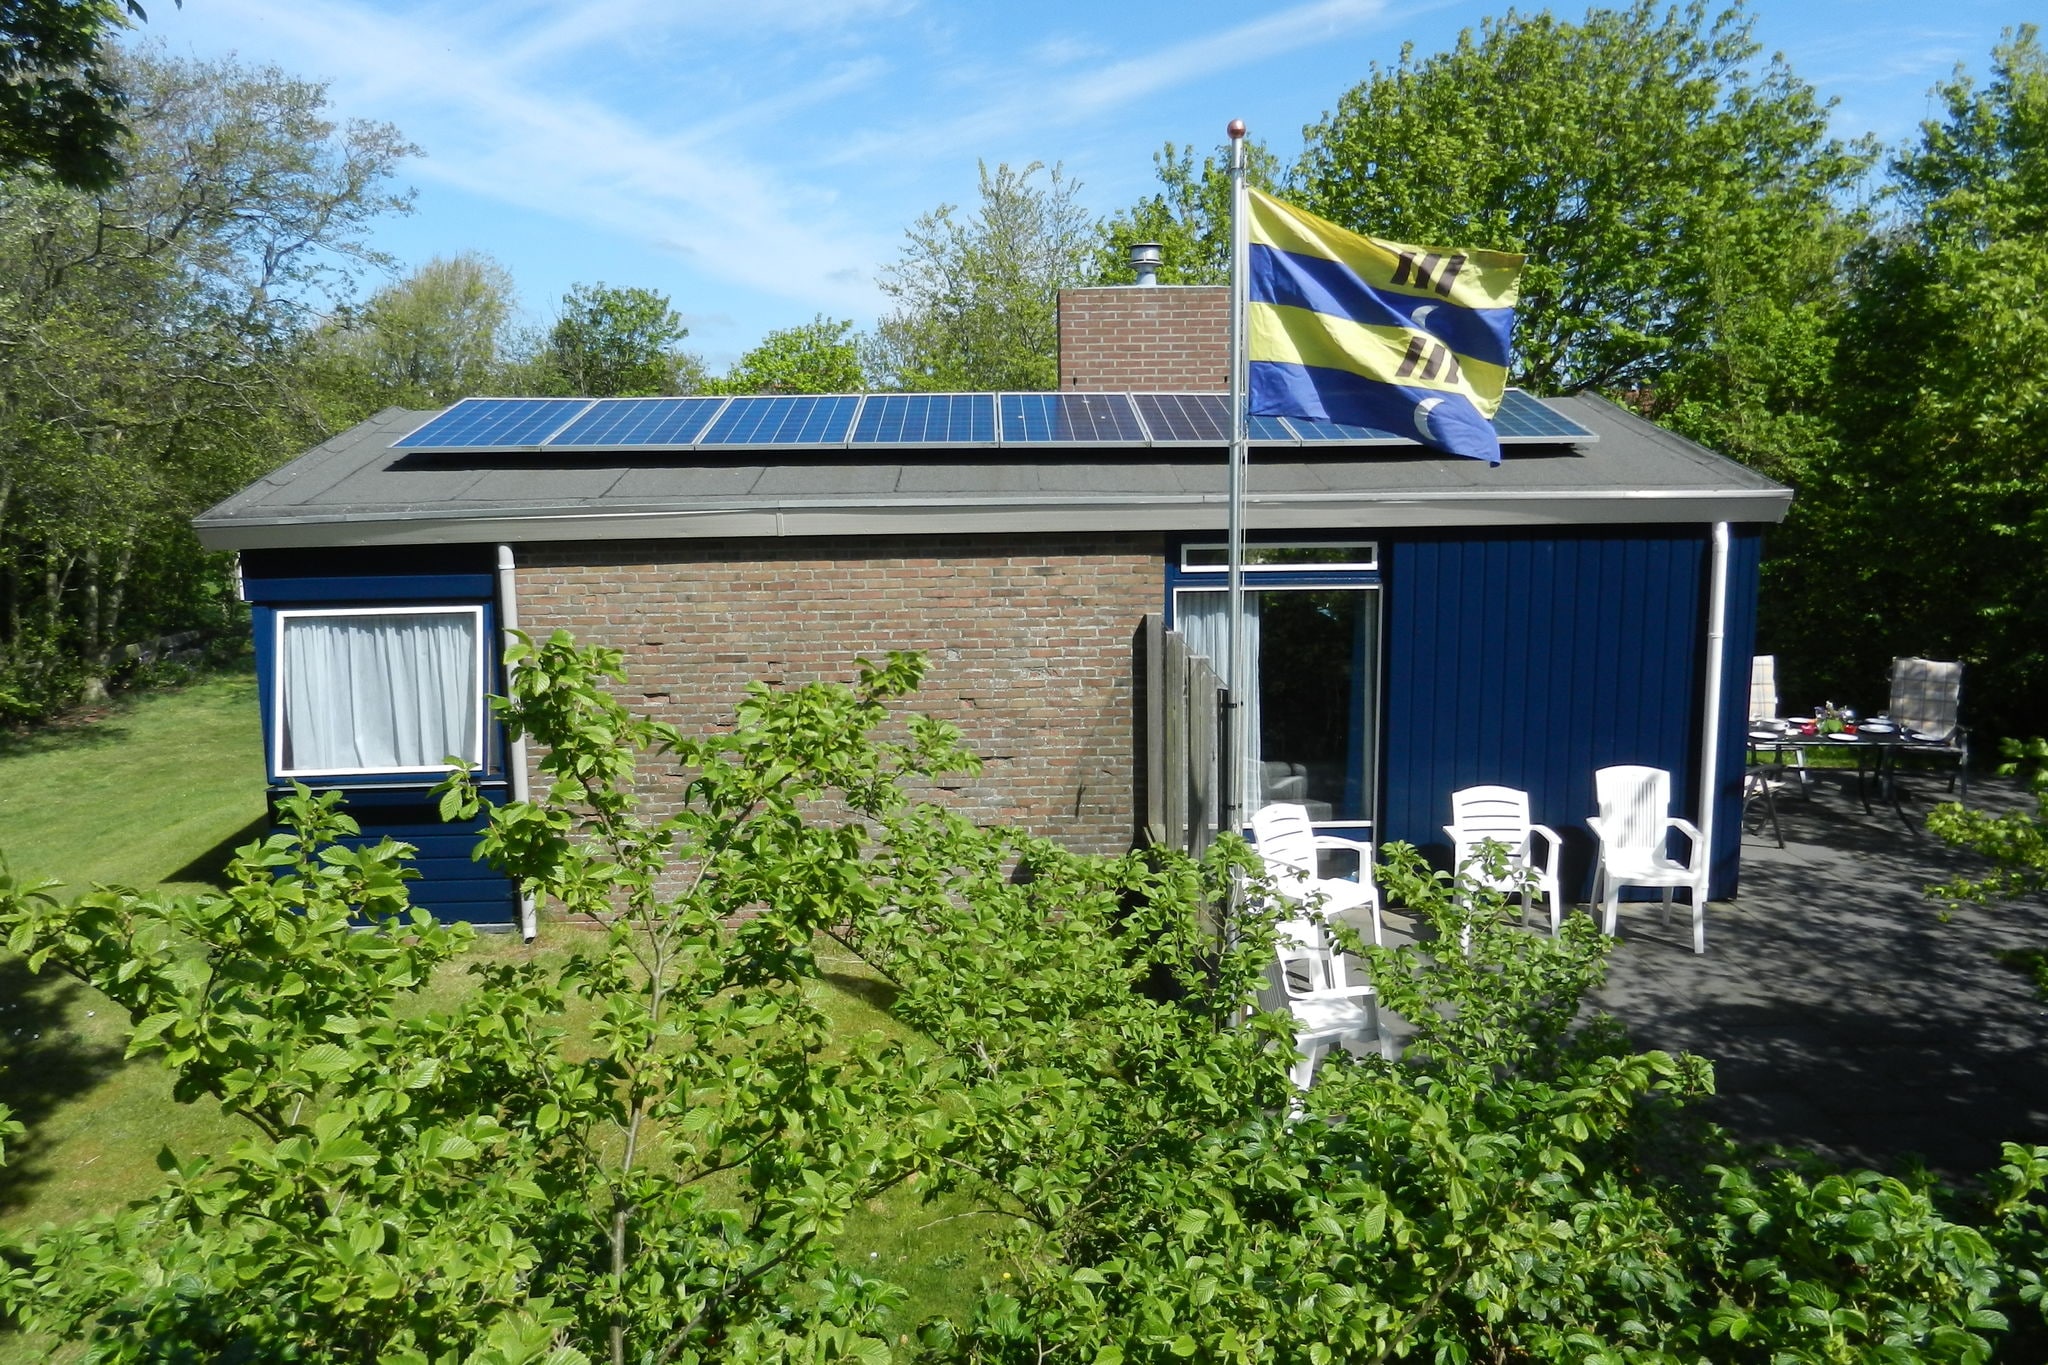 Bungalow in Nes on Ameland with spacious terrace